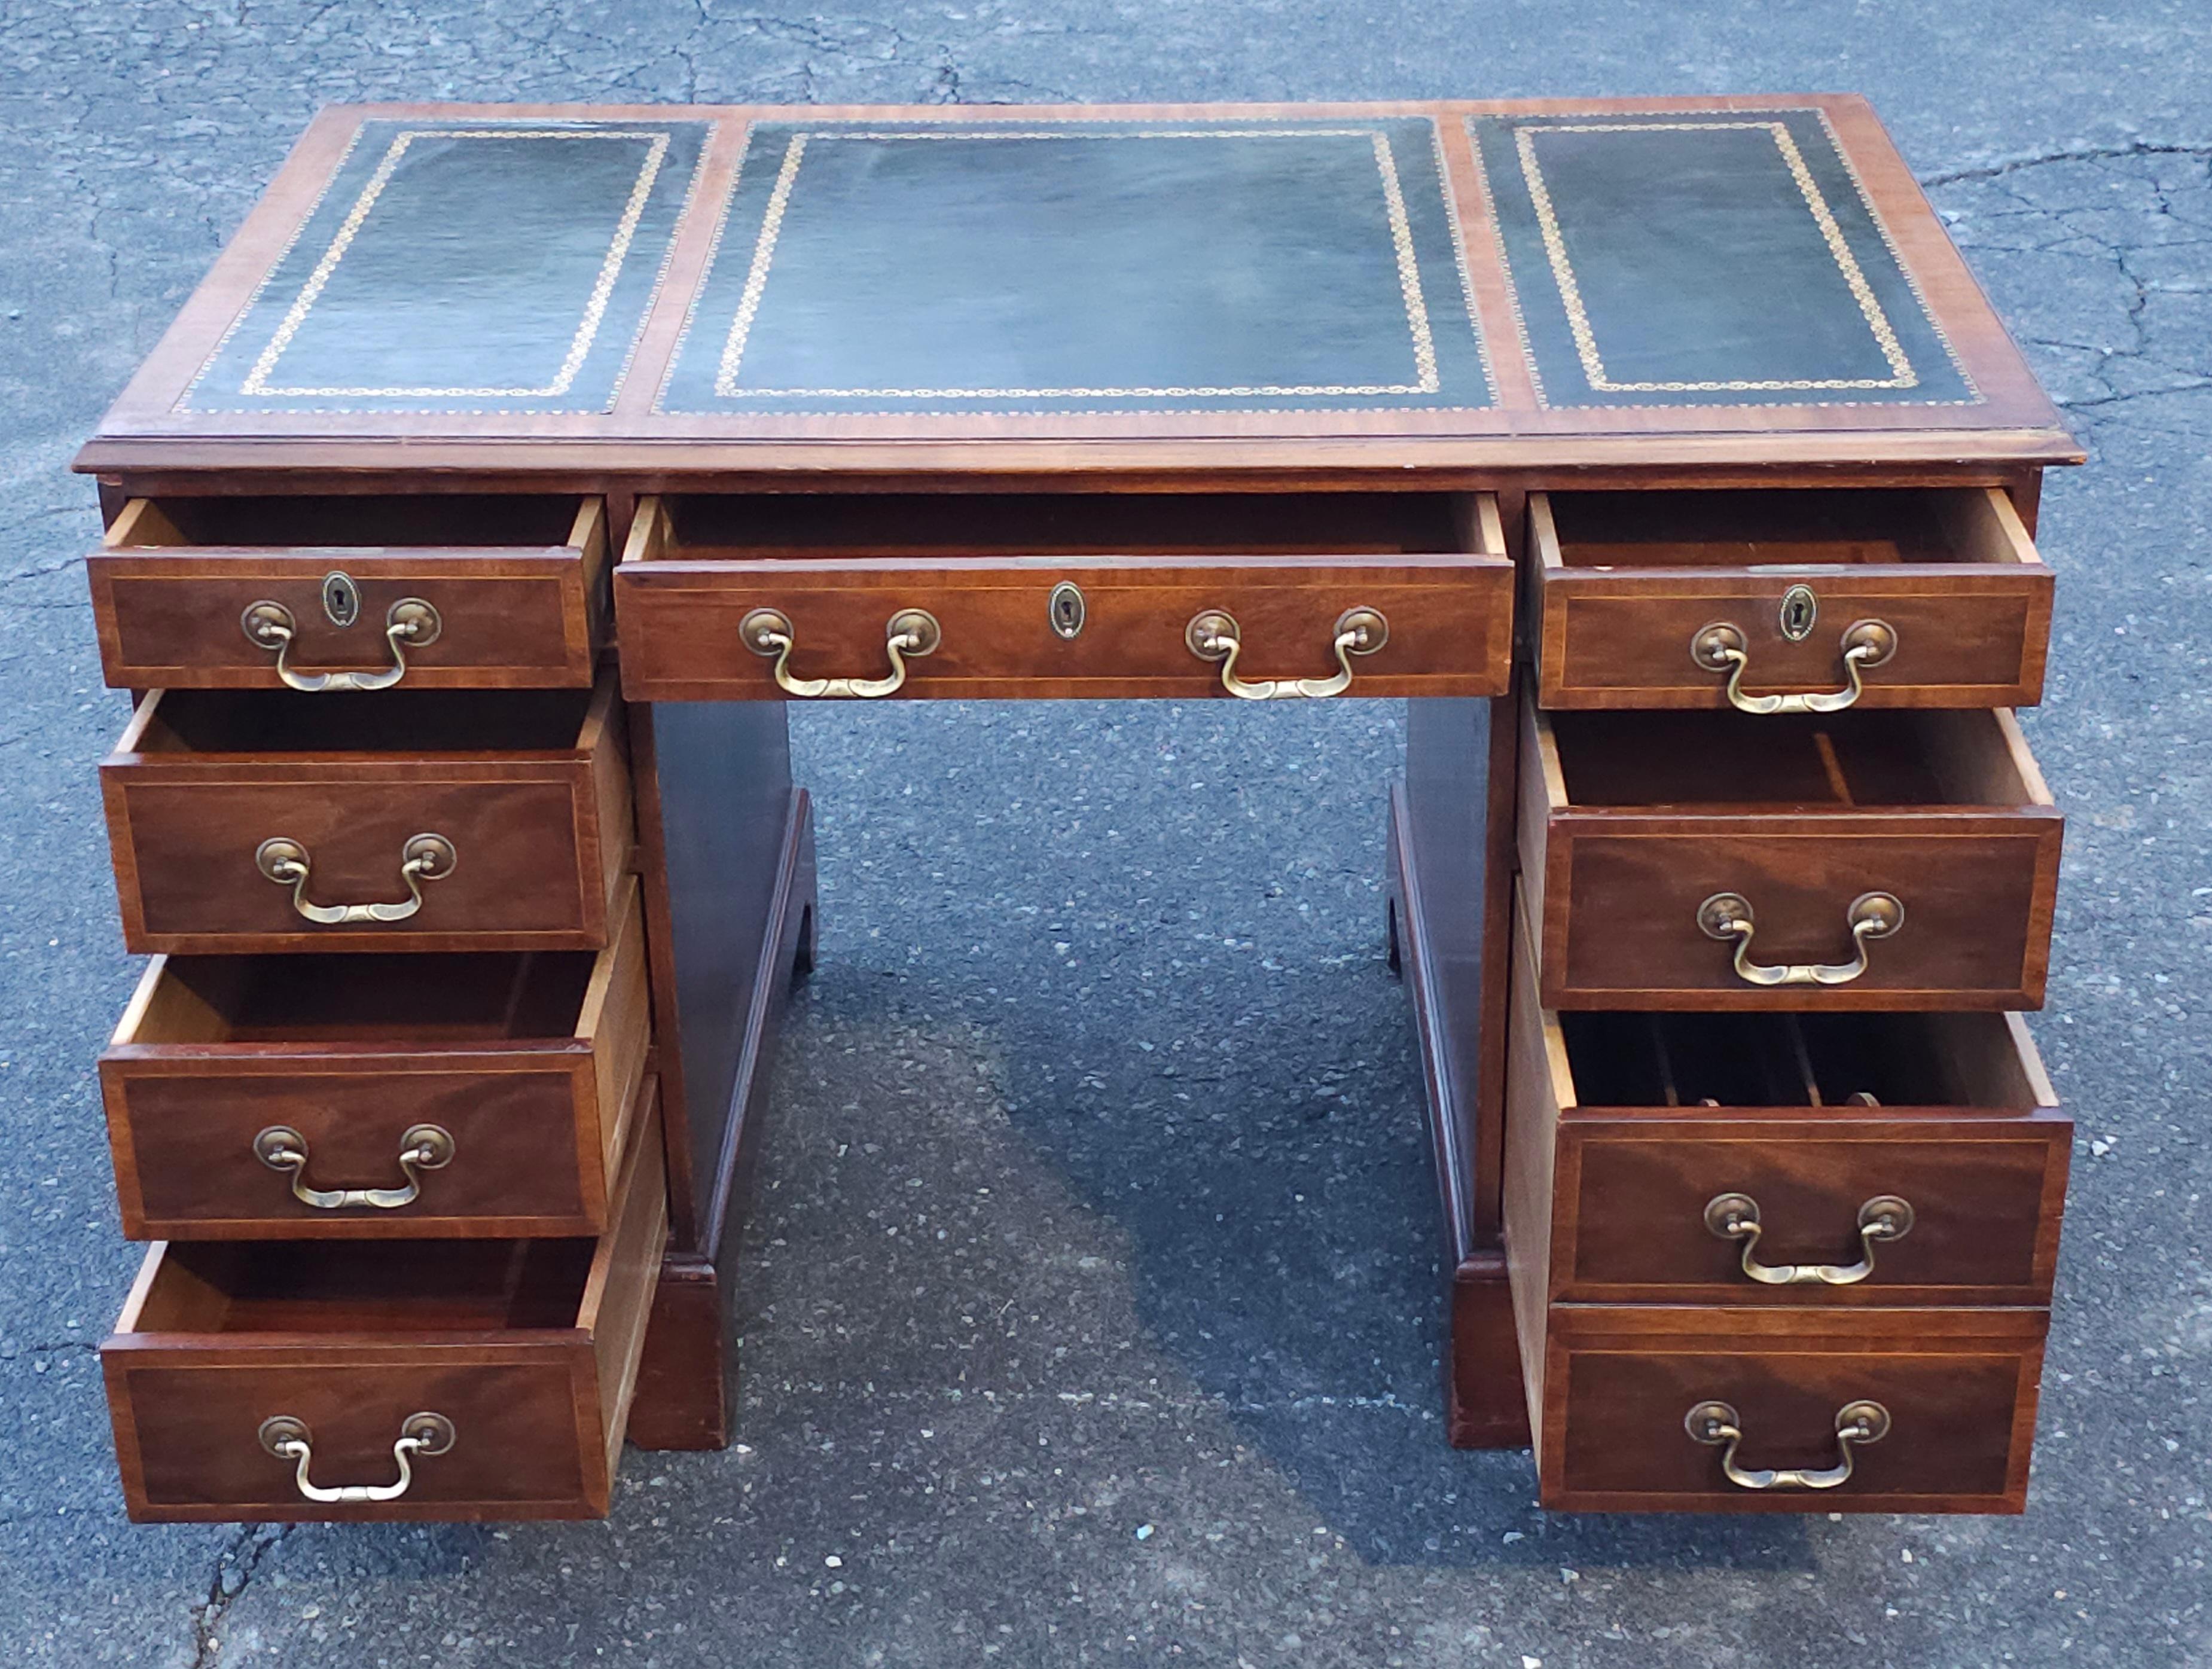 Canadian Hespeler Furniture Chippendale Mahogany Inlays and Green Leather Top Desk For Sale